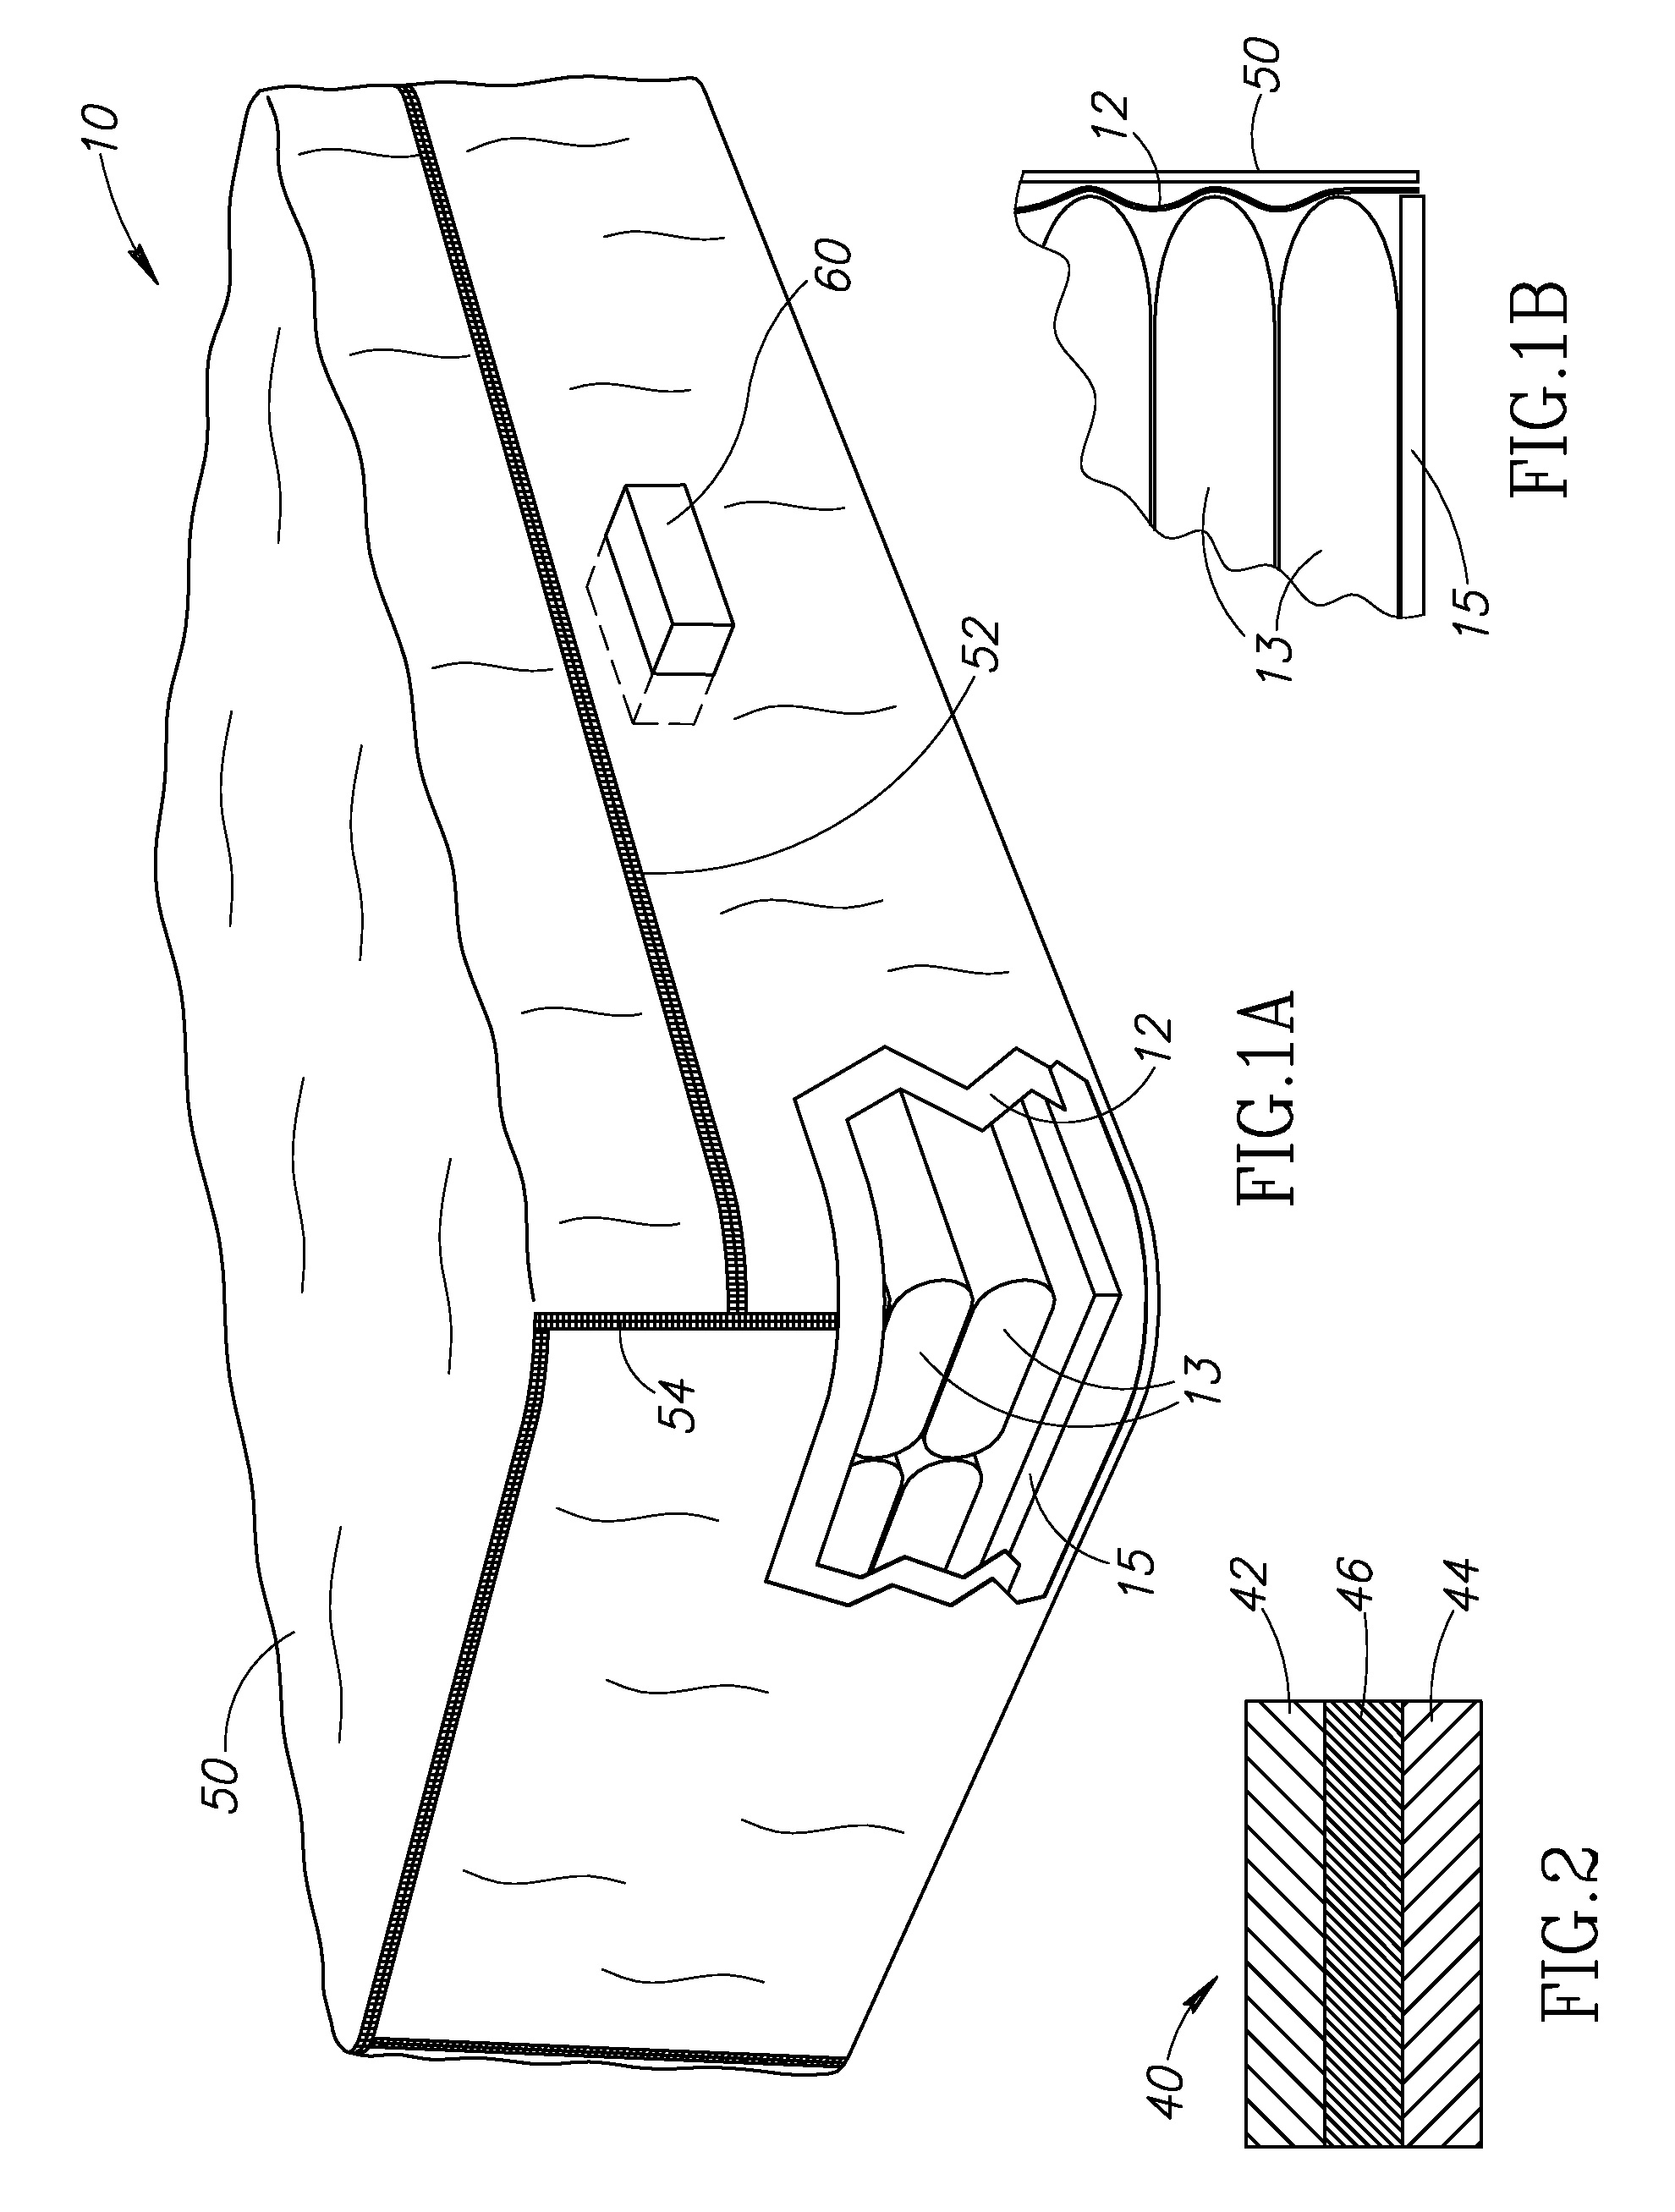 System and method for free-standing storage of agricultural commodities using a hermetic lightweight sleeve